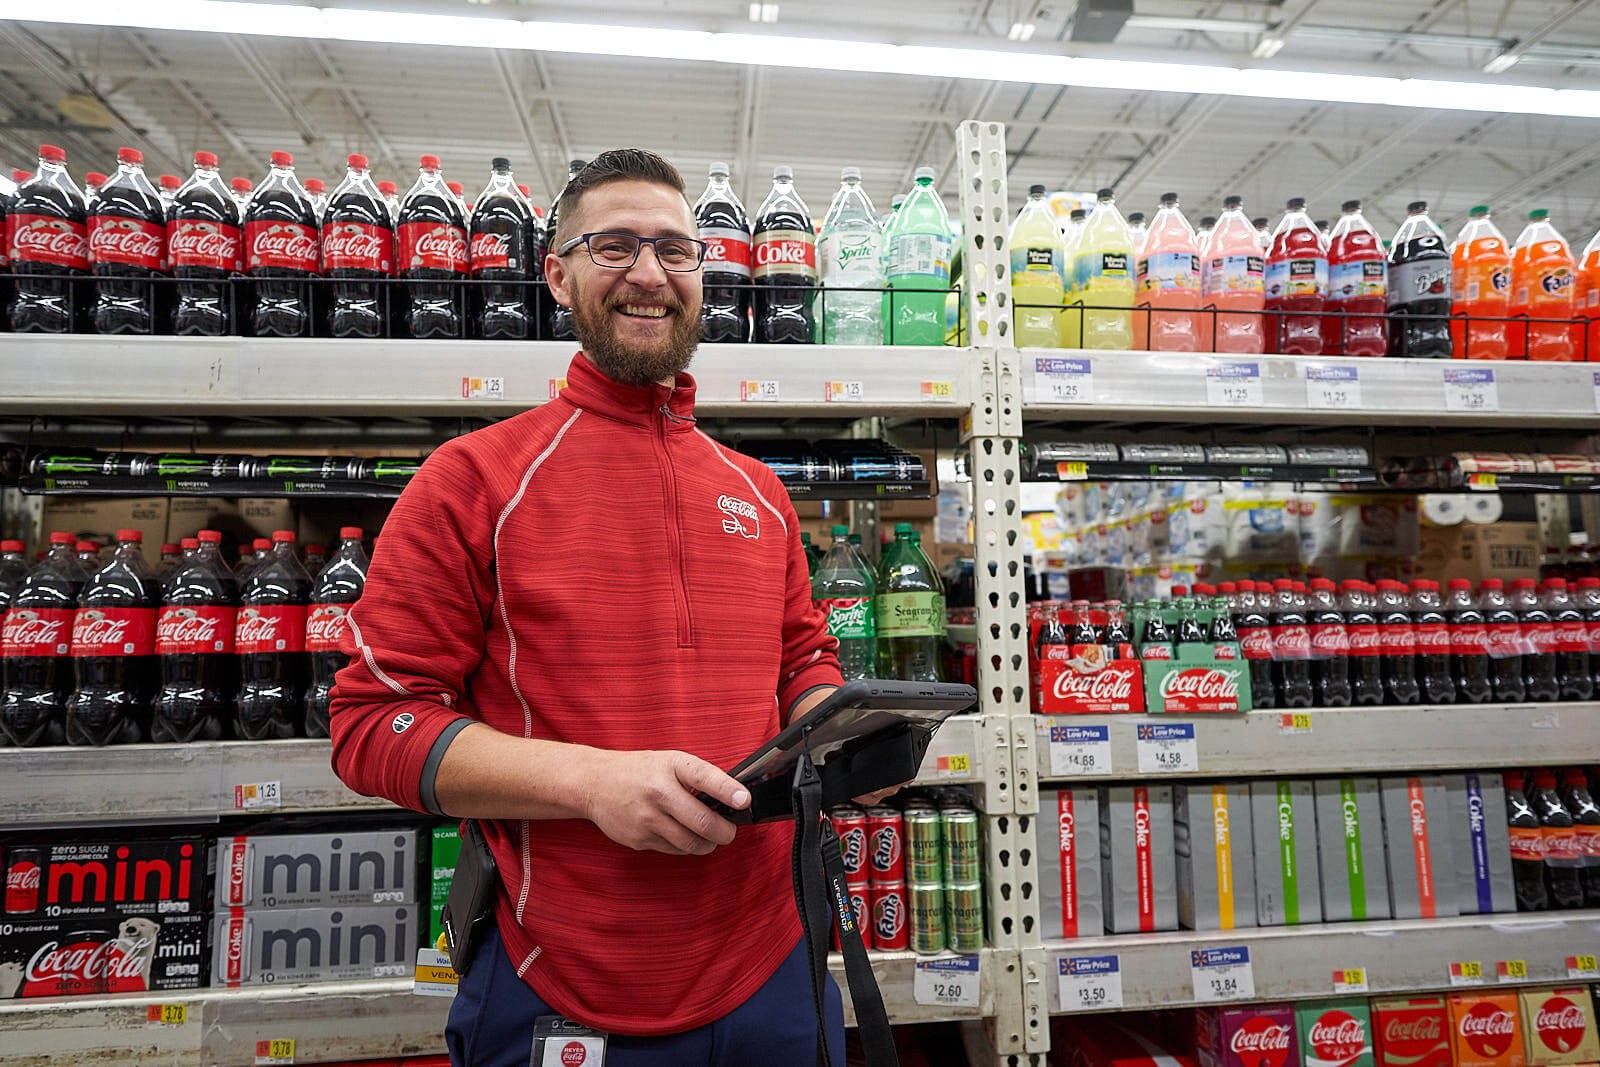 Smiling man stands by case of Coca-Cola products in grocery store